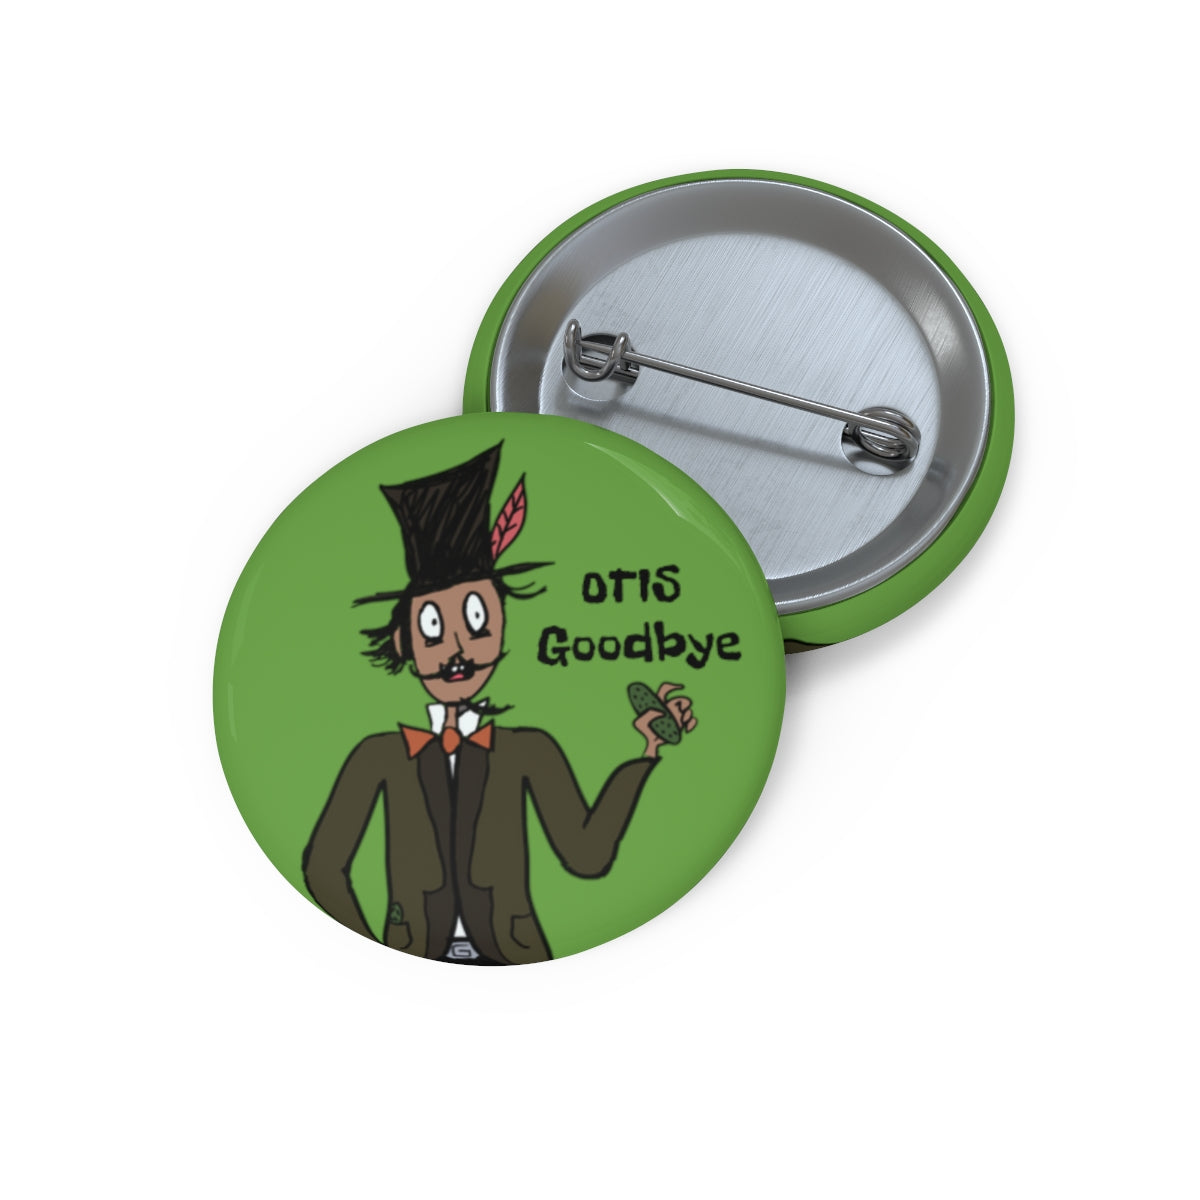 Otis Goodbye - The Official Pin of The Goodbye Family